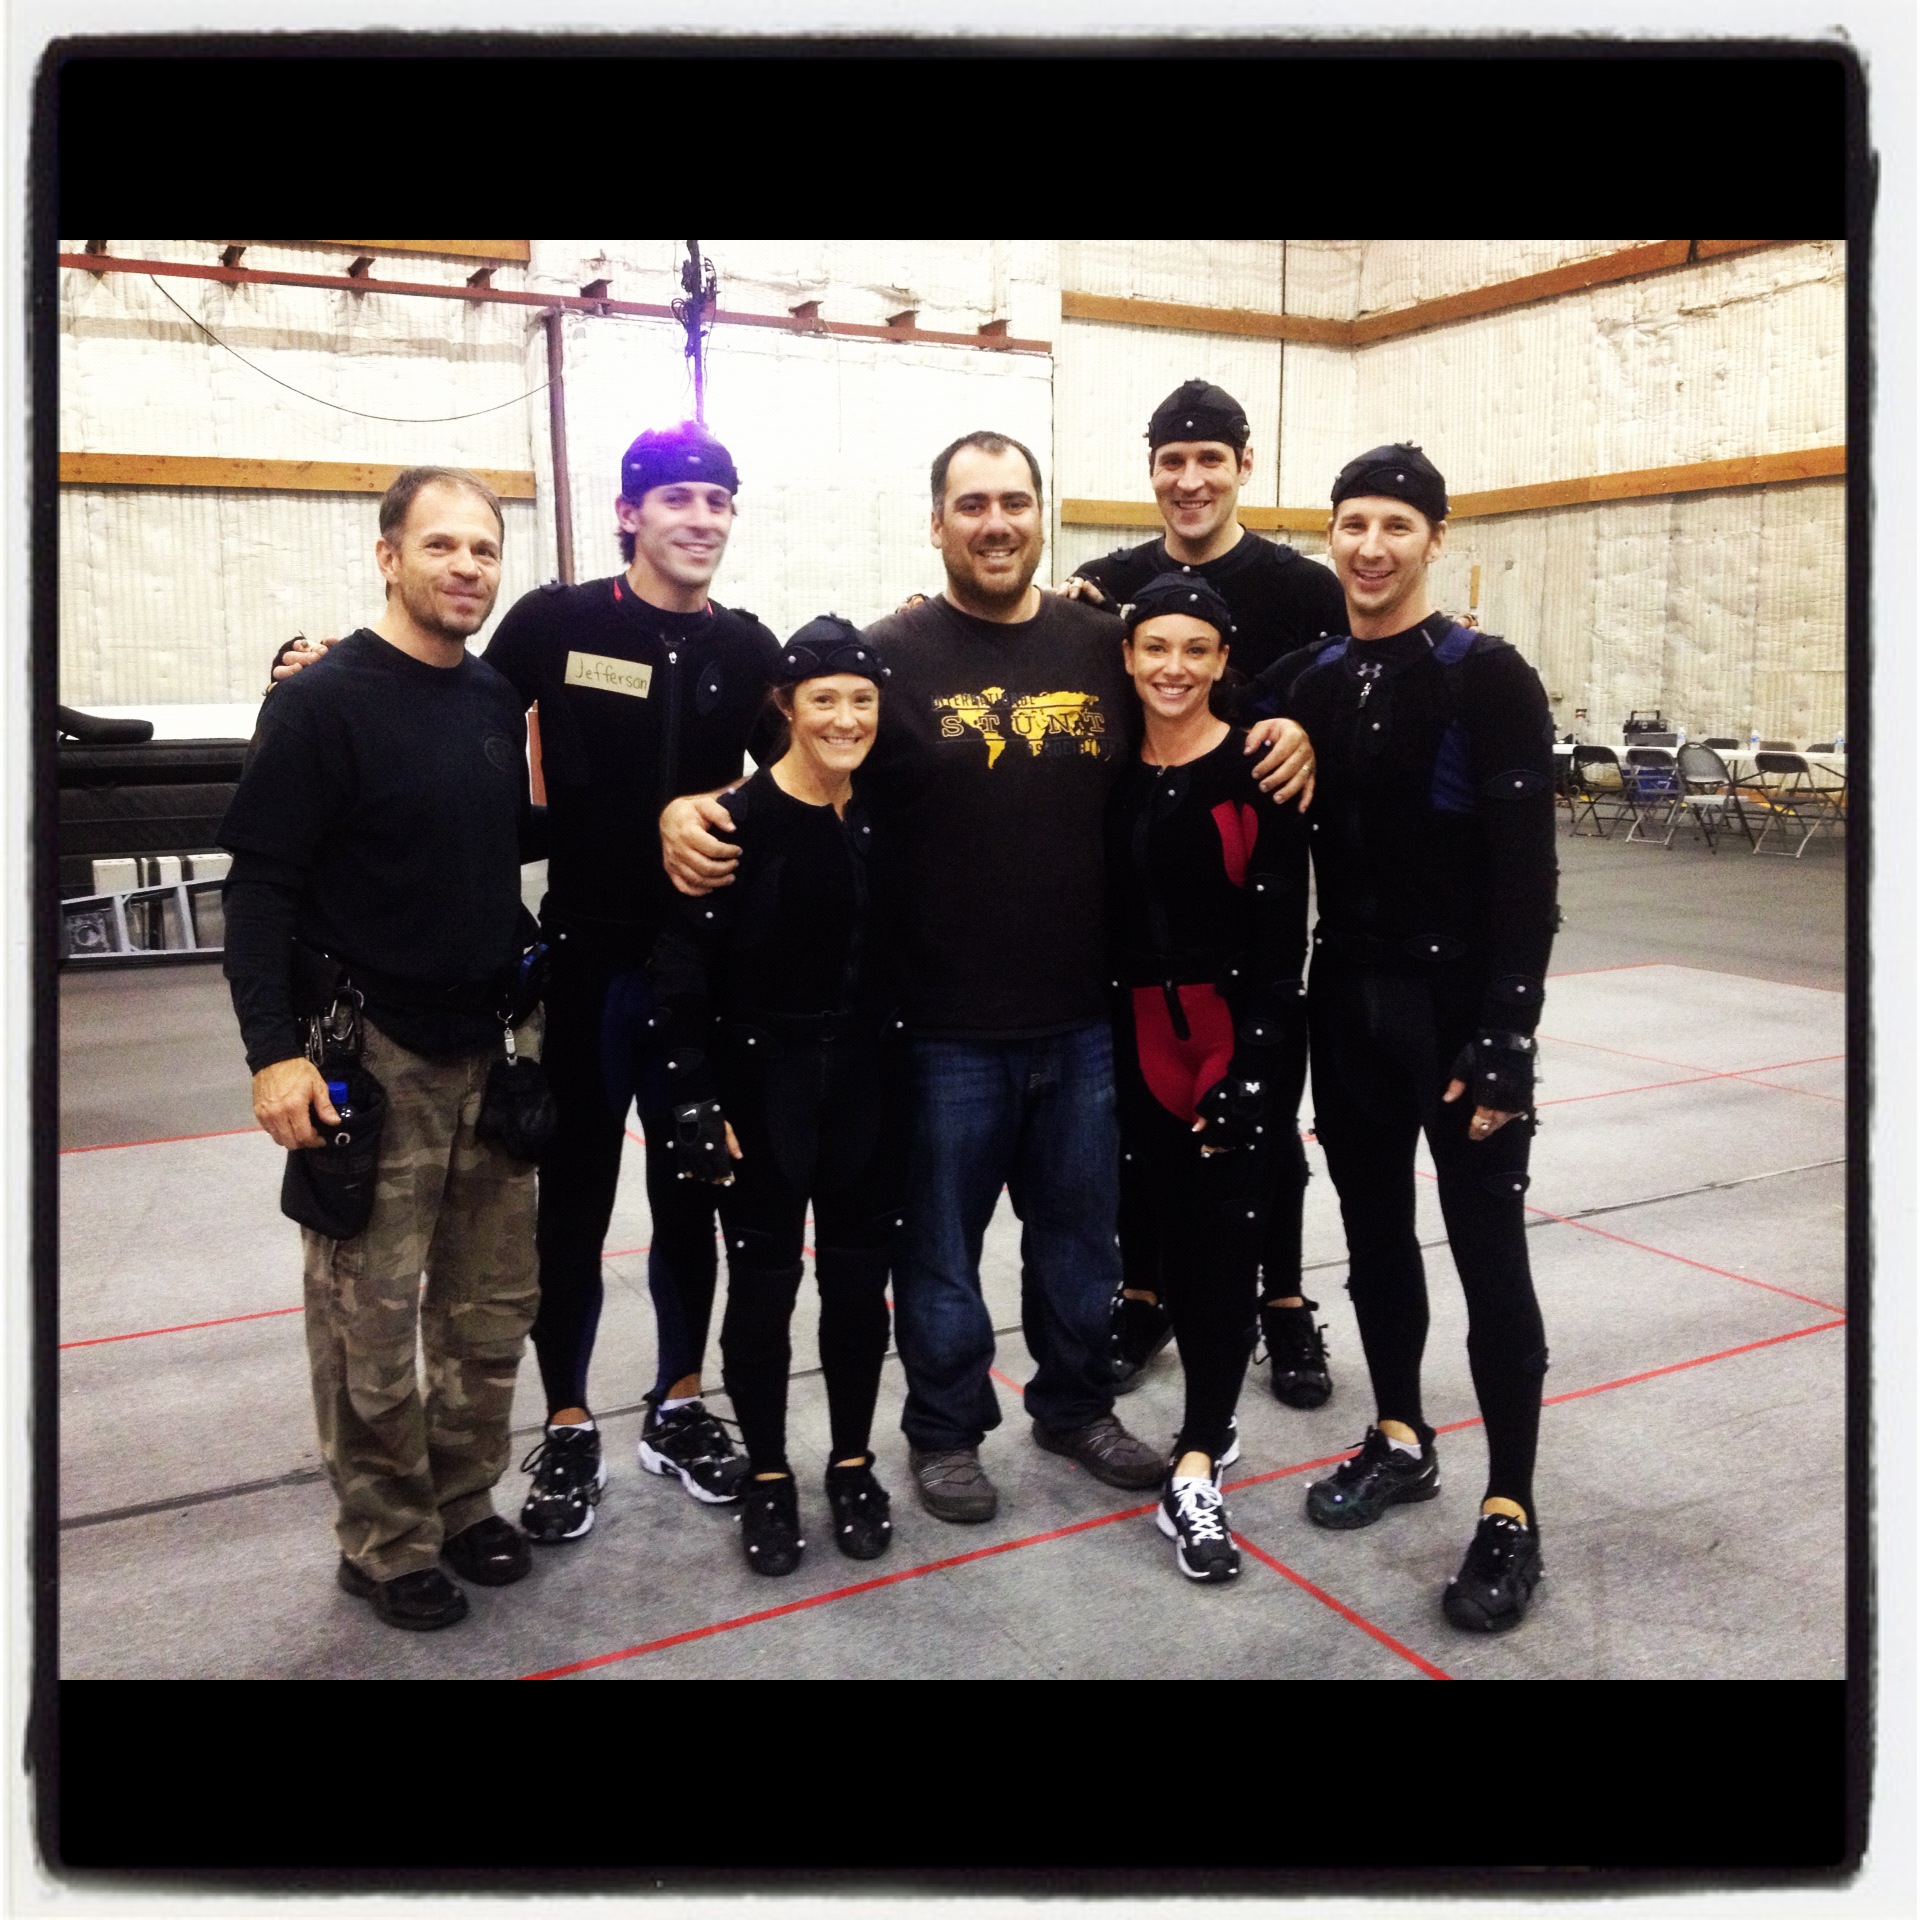 My stunt team and actors from an upcoming video game that I stunt coordinated. From L-R: Marque Ohmes, Jefferson Cox, Luci Romberg, Me, Meegan Godfrey, Travis Willingham, Colin Follenweider